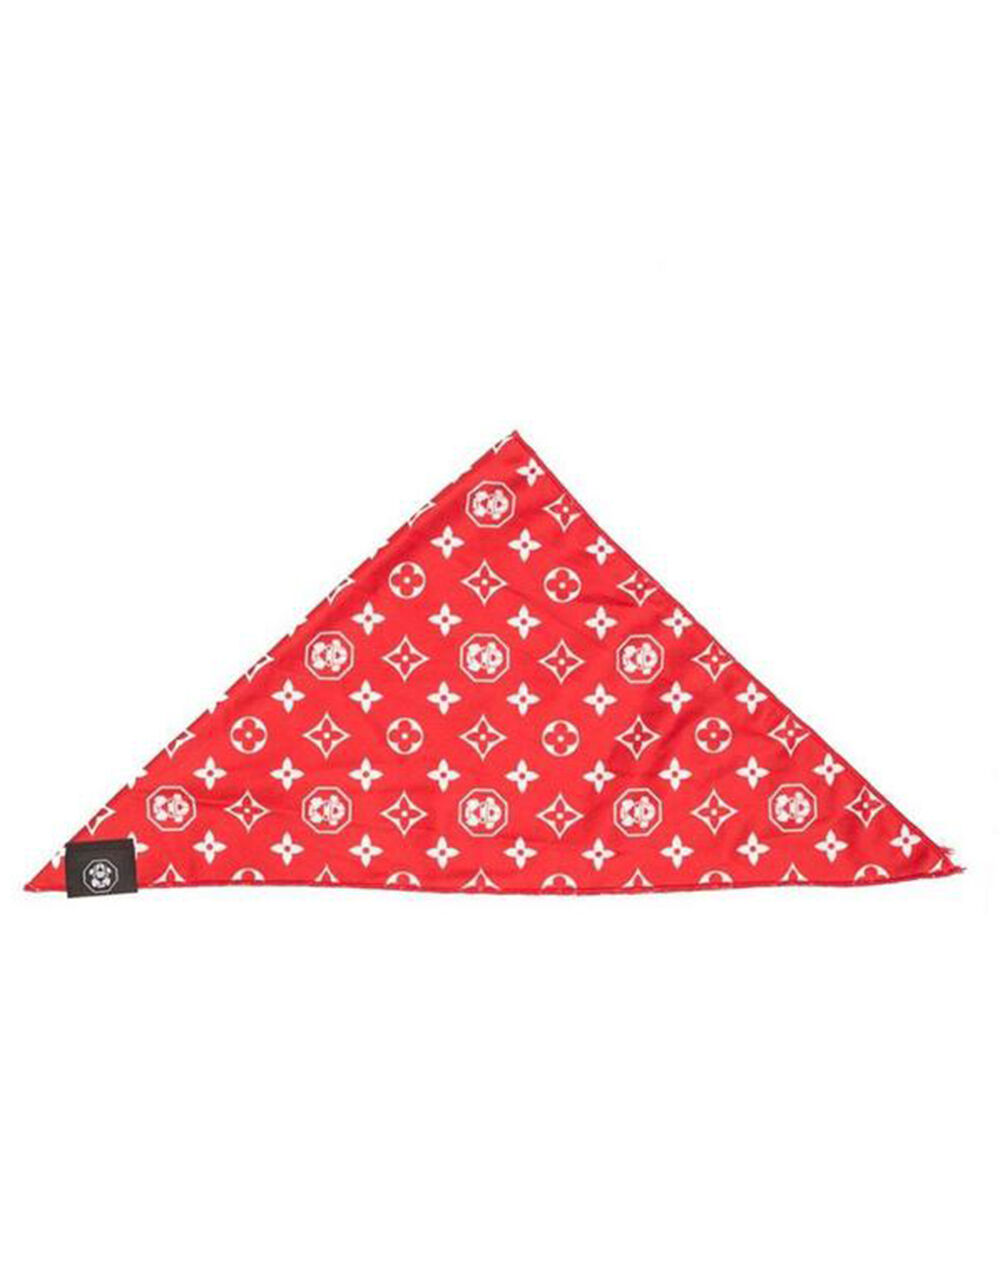 Monogram Hype | Cooling Bandanna - Red - L